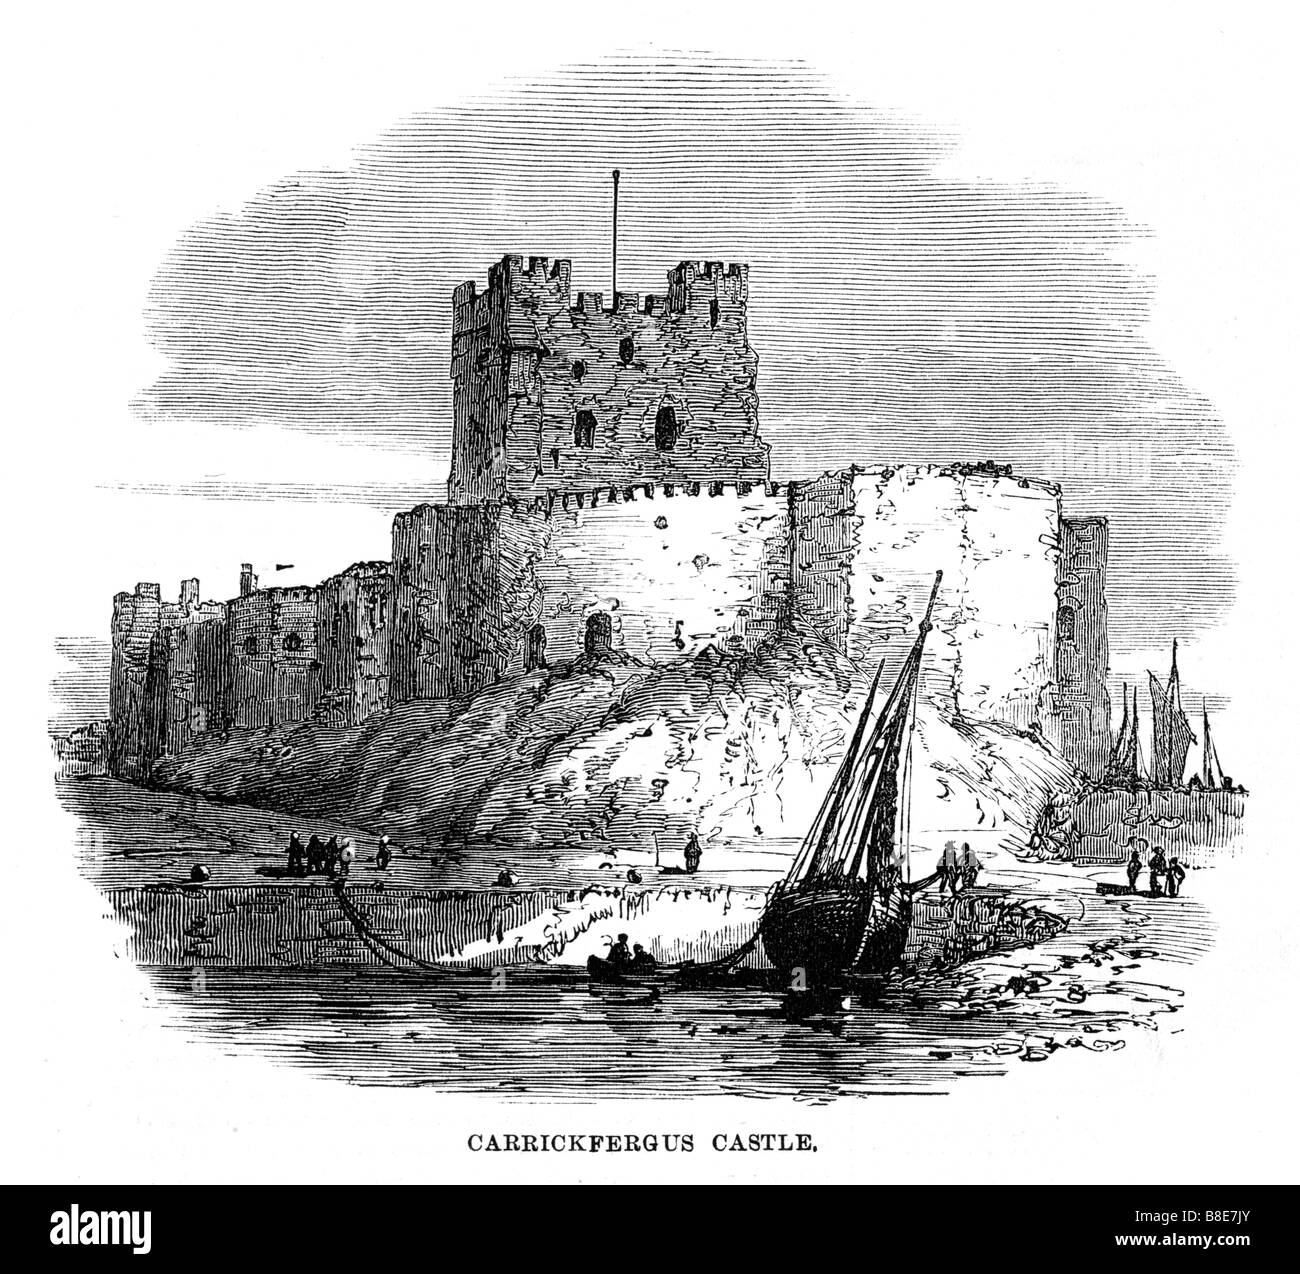 Carrickfergus Castle 1874 engraving of the Norman castle on the shores of Belfast Lough Stock Photo